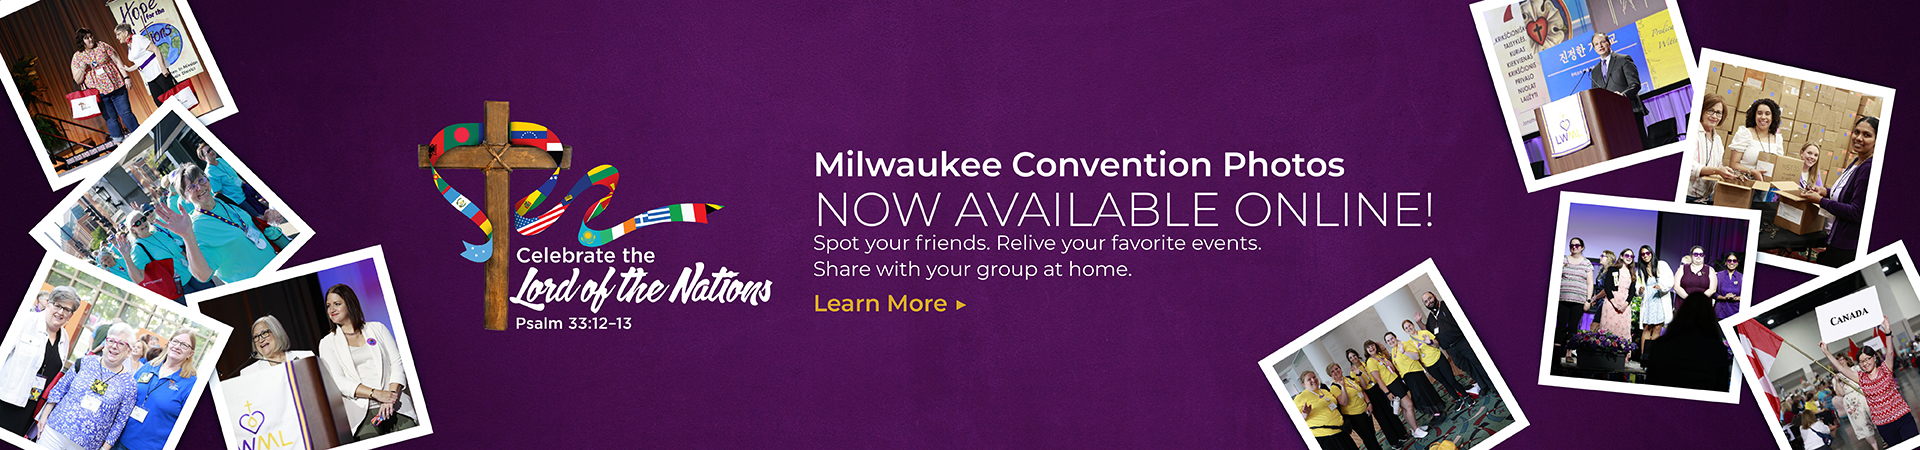 Milwaukee convention photos now available online. Learn more.